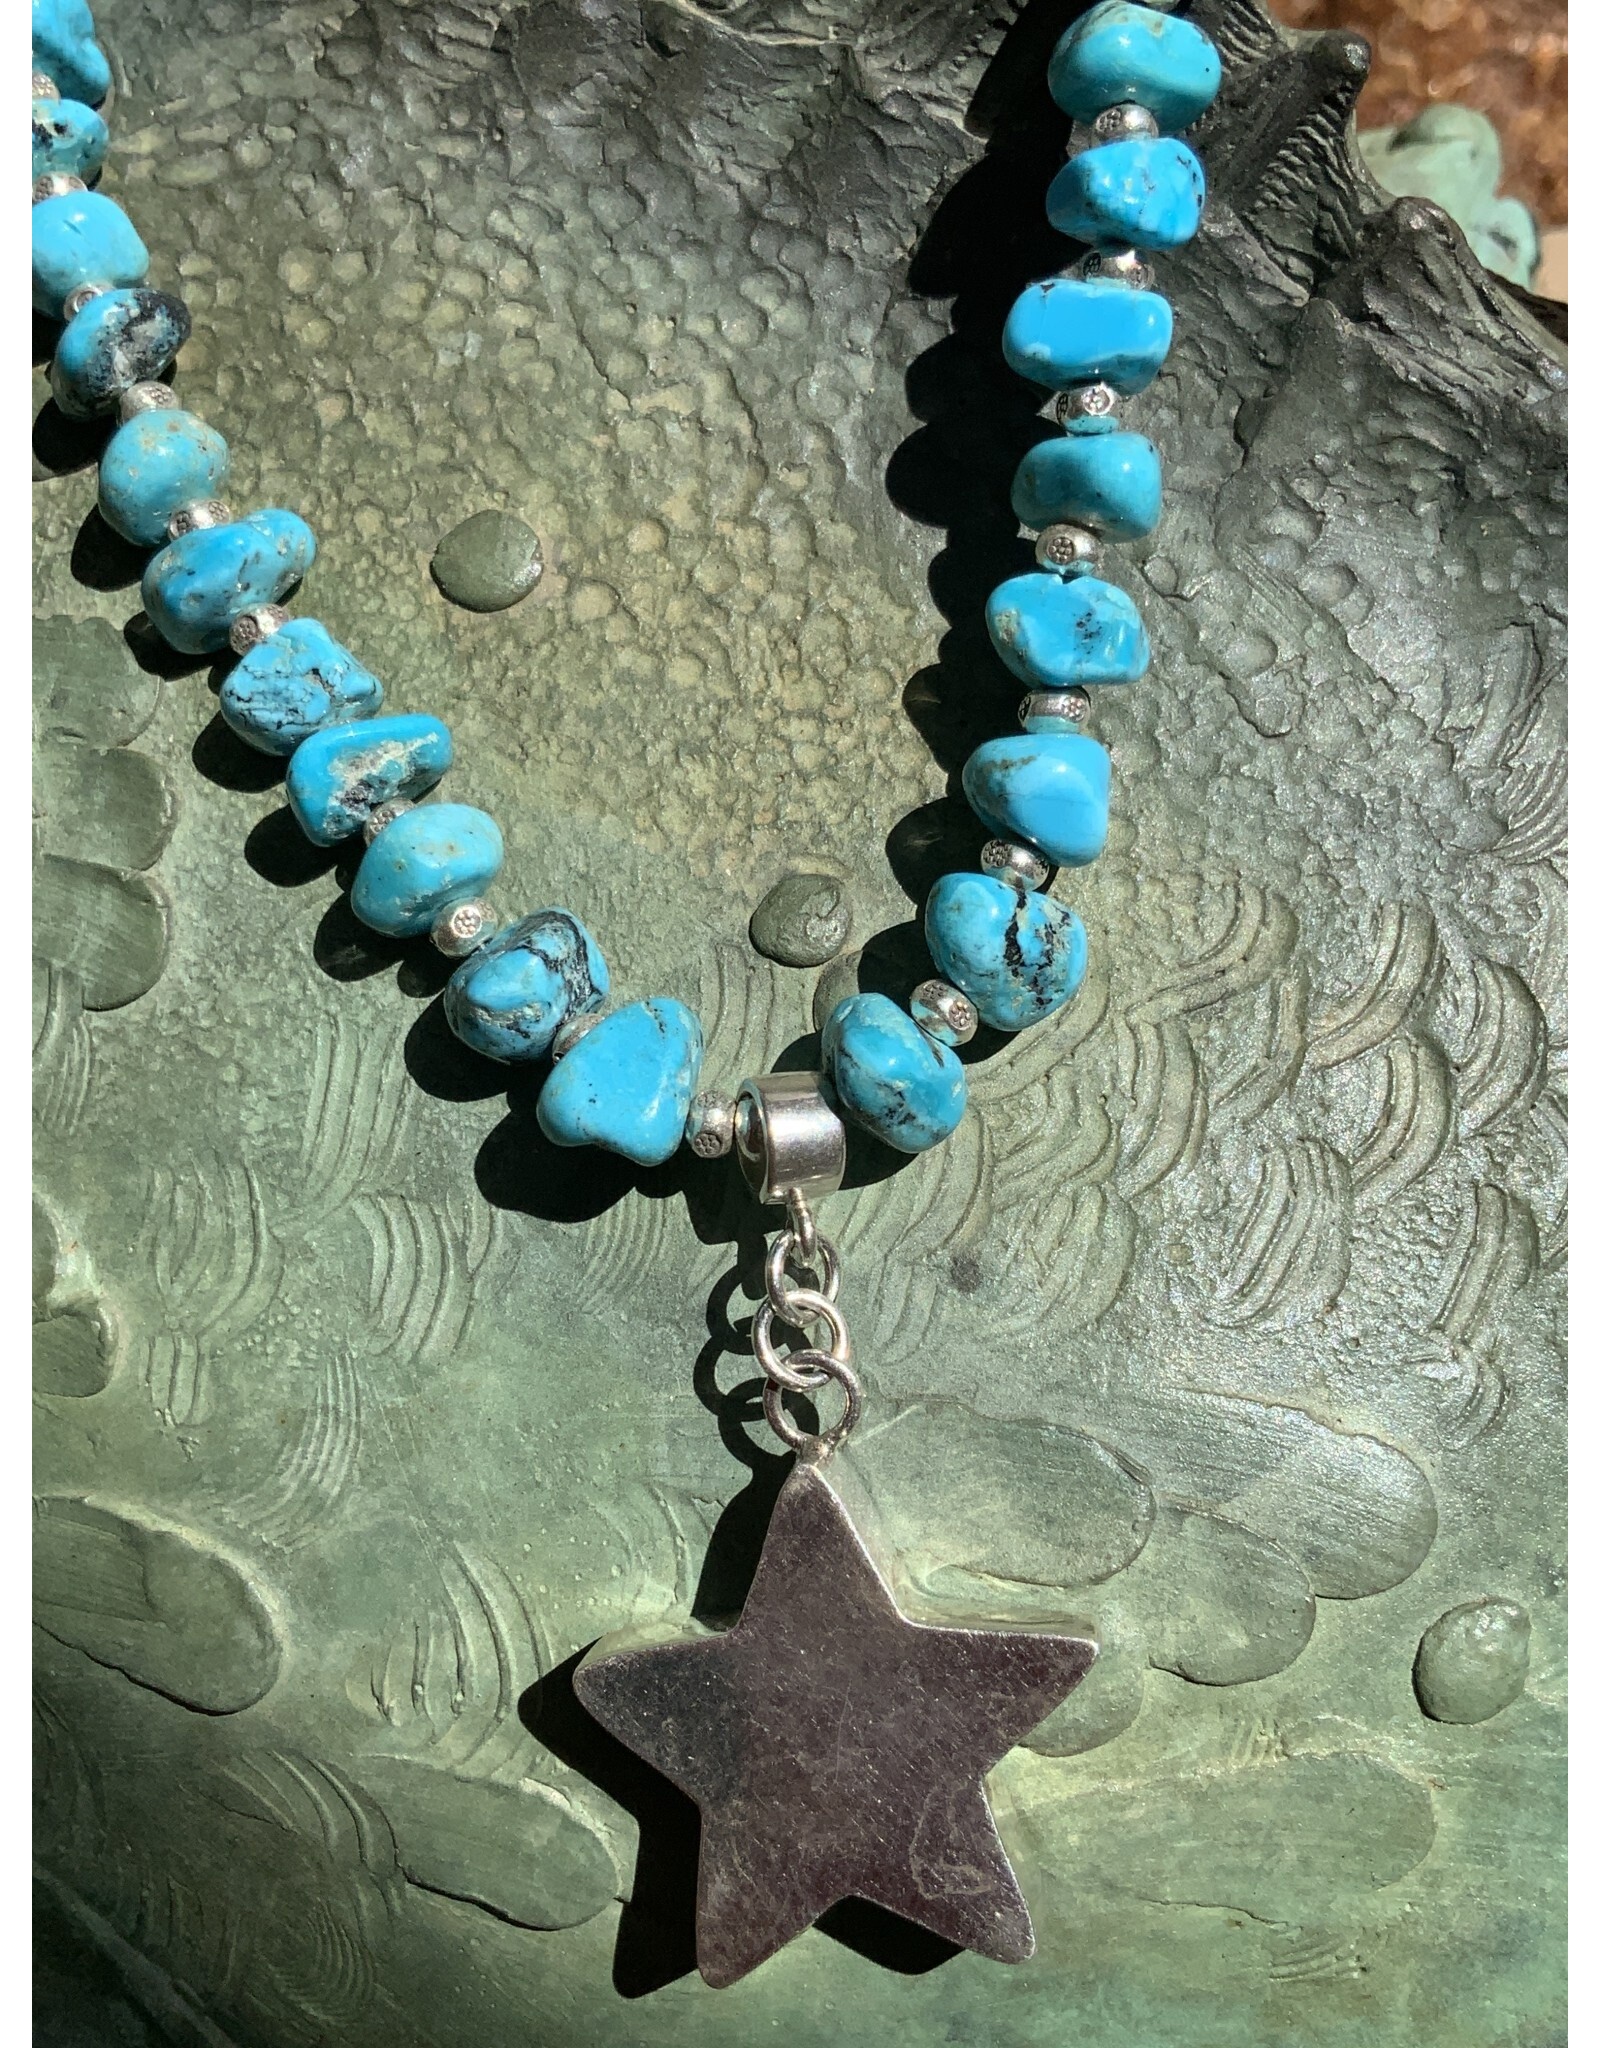 Annette Colby - Jeweler Sleeping Beauty Turquoise Star Necklace - AC